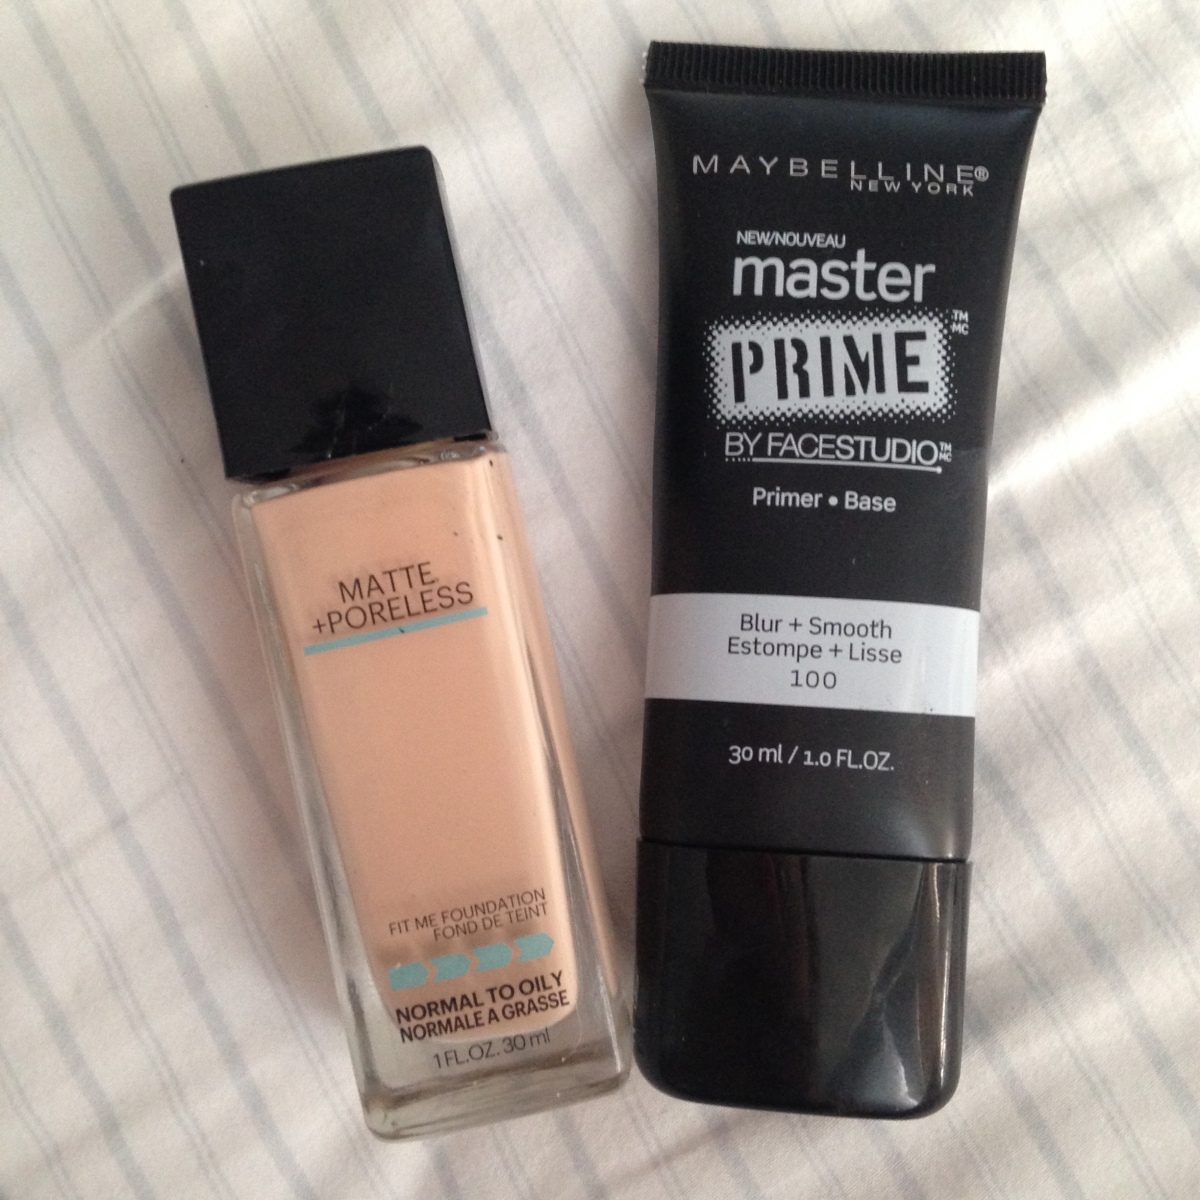 Maybelline Fit Me Foundation- MAKEUP, + ALL & Primer FASHION – LIFESTYLE & Matte Maybelline Face Poreless THINGS